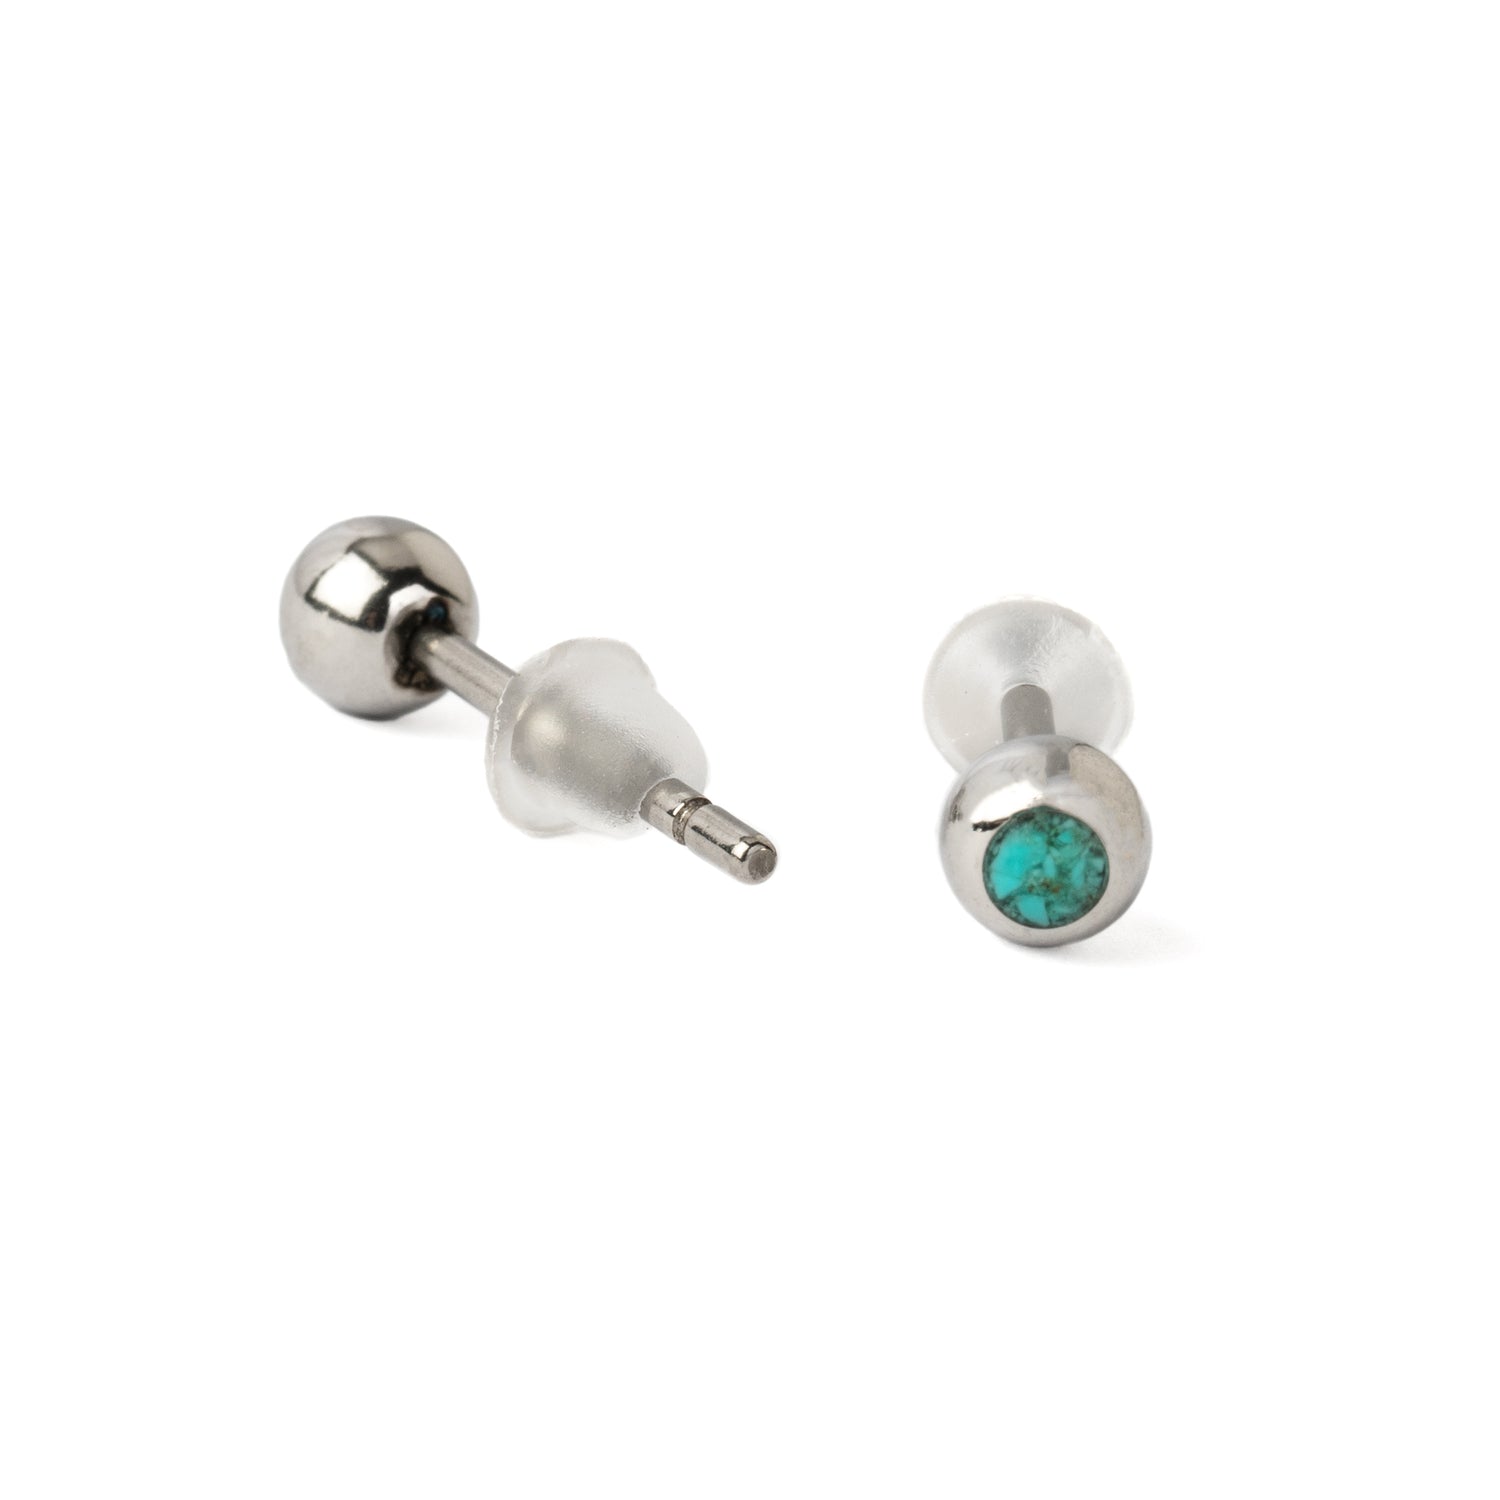 Turquoise Ear Studs front and back view